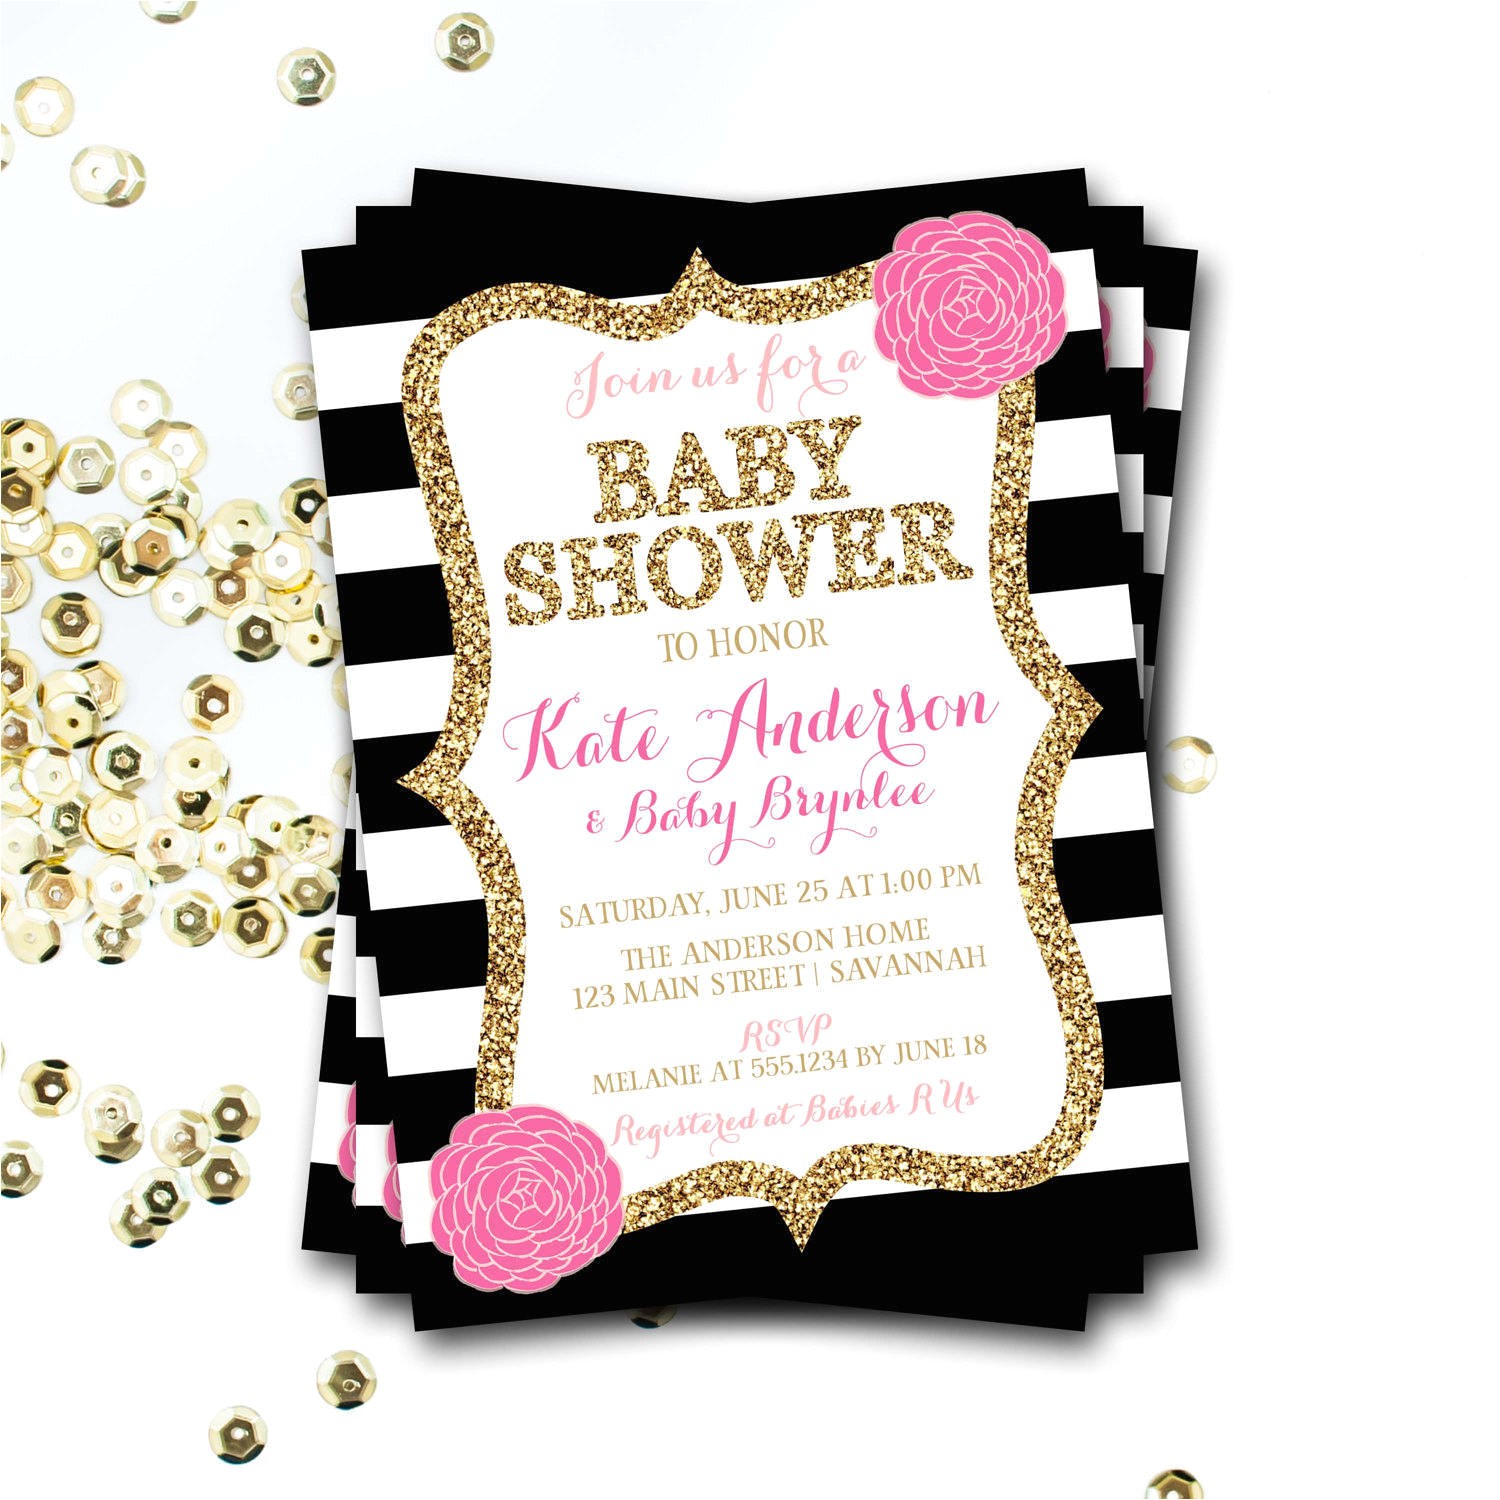 Red Black and White Baby Shower Invitations Pink Black and White Baby Shower Invitation Pink and